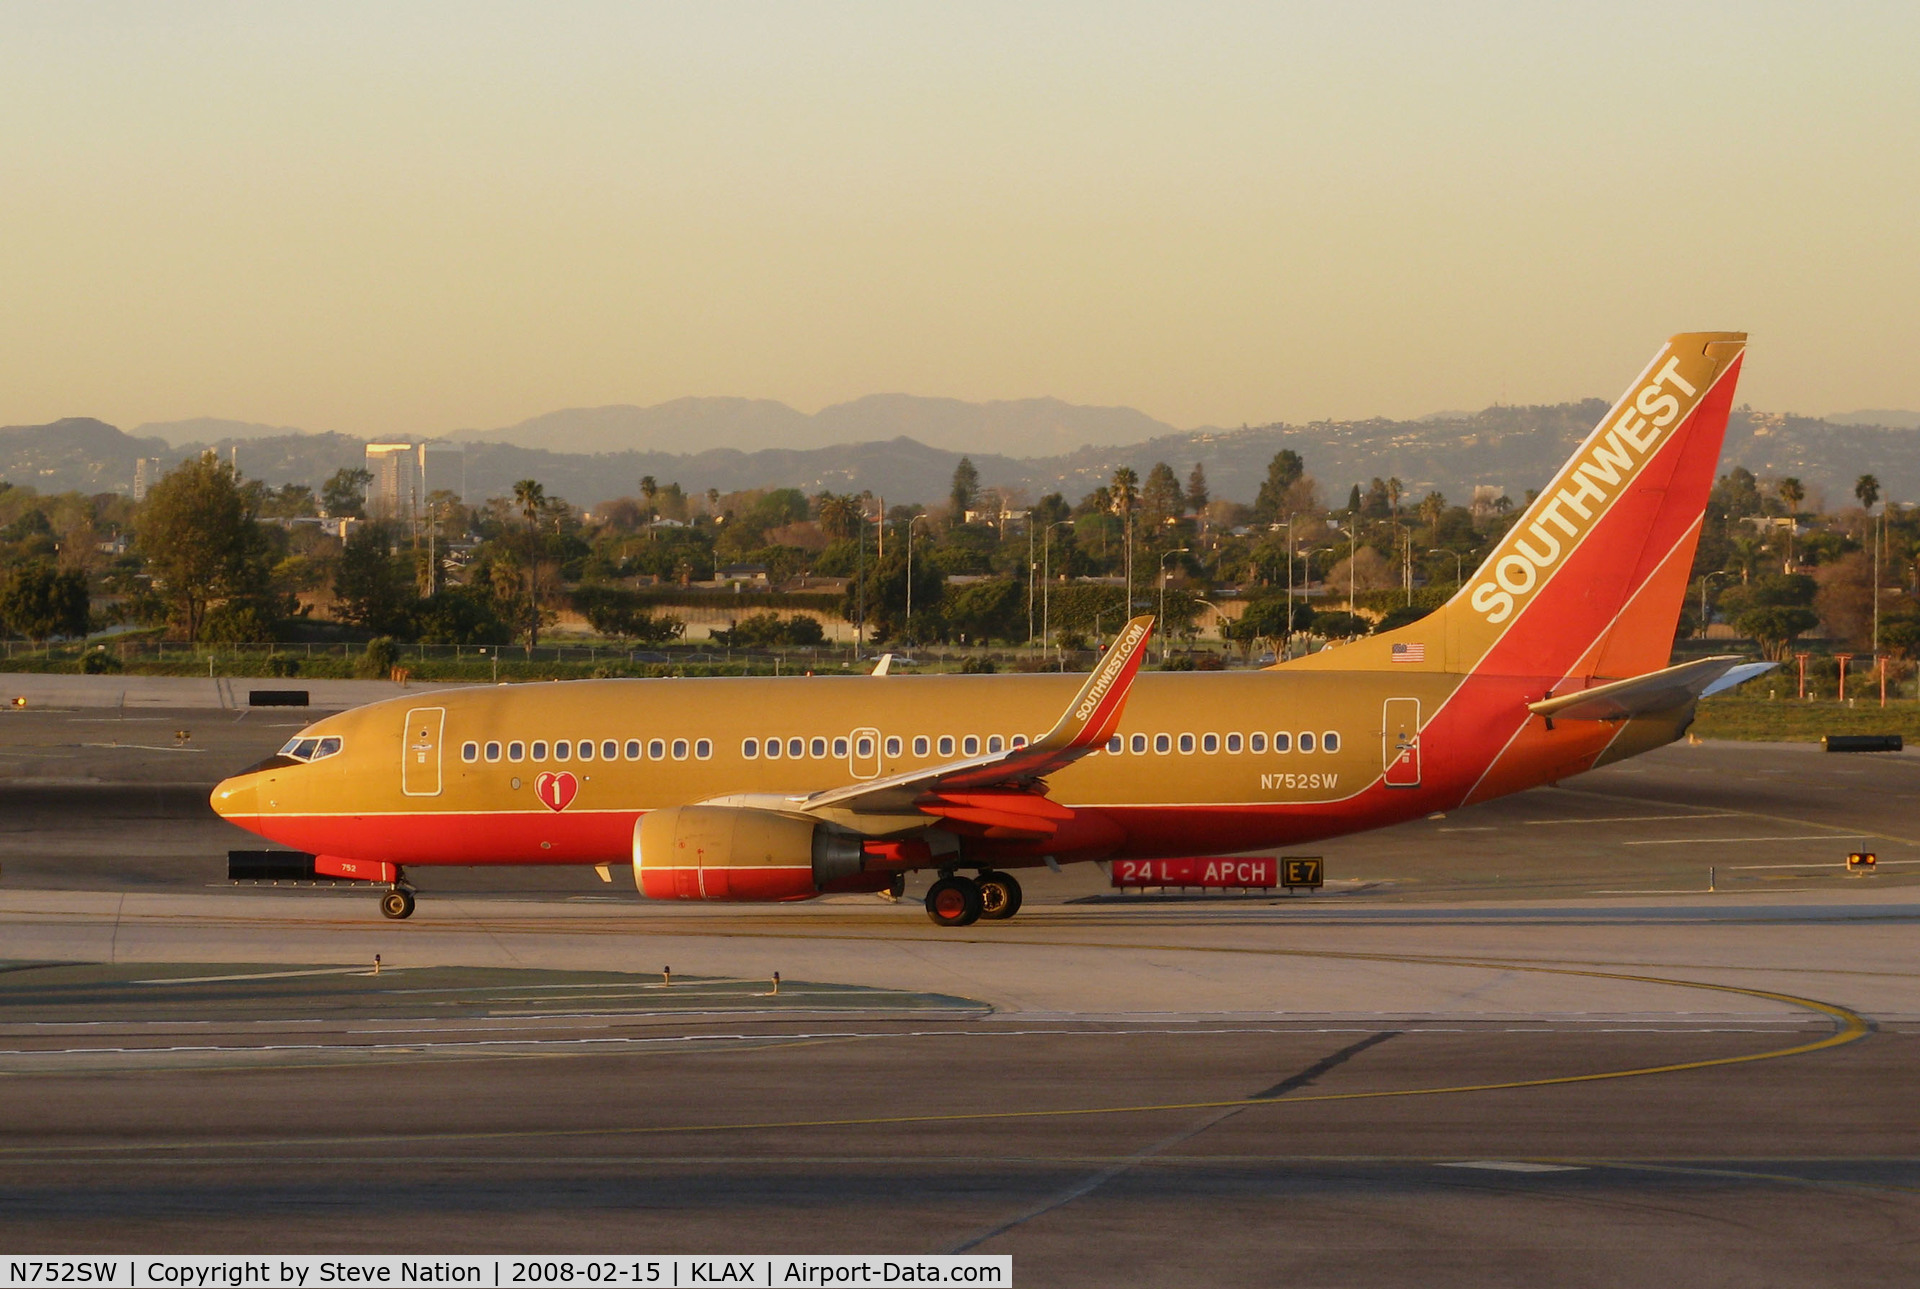 N752SW, 1999 Boeing 737-7H4 C/N 29804, Southwest 1999 737-7H4 in old colors lined up for takeoff @ Los Angeles International Airport, CA